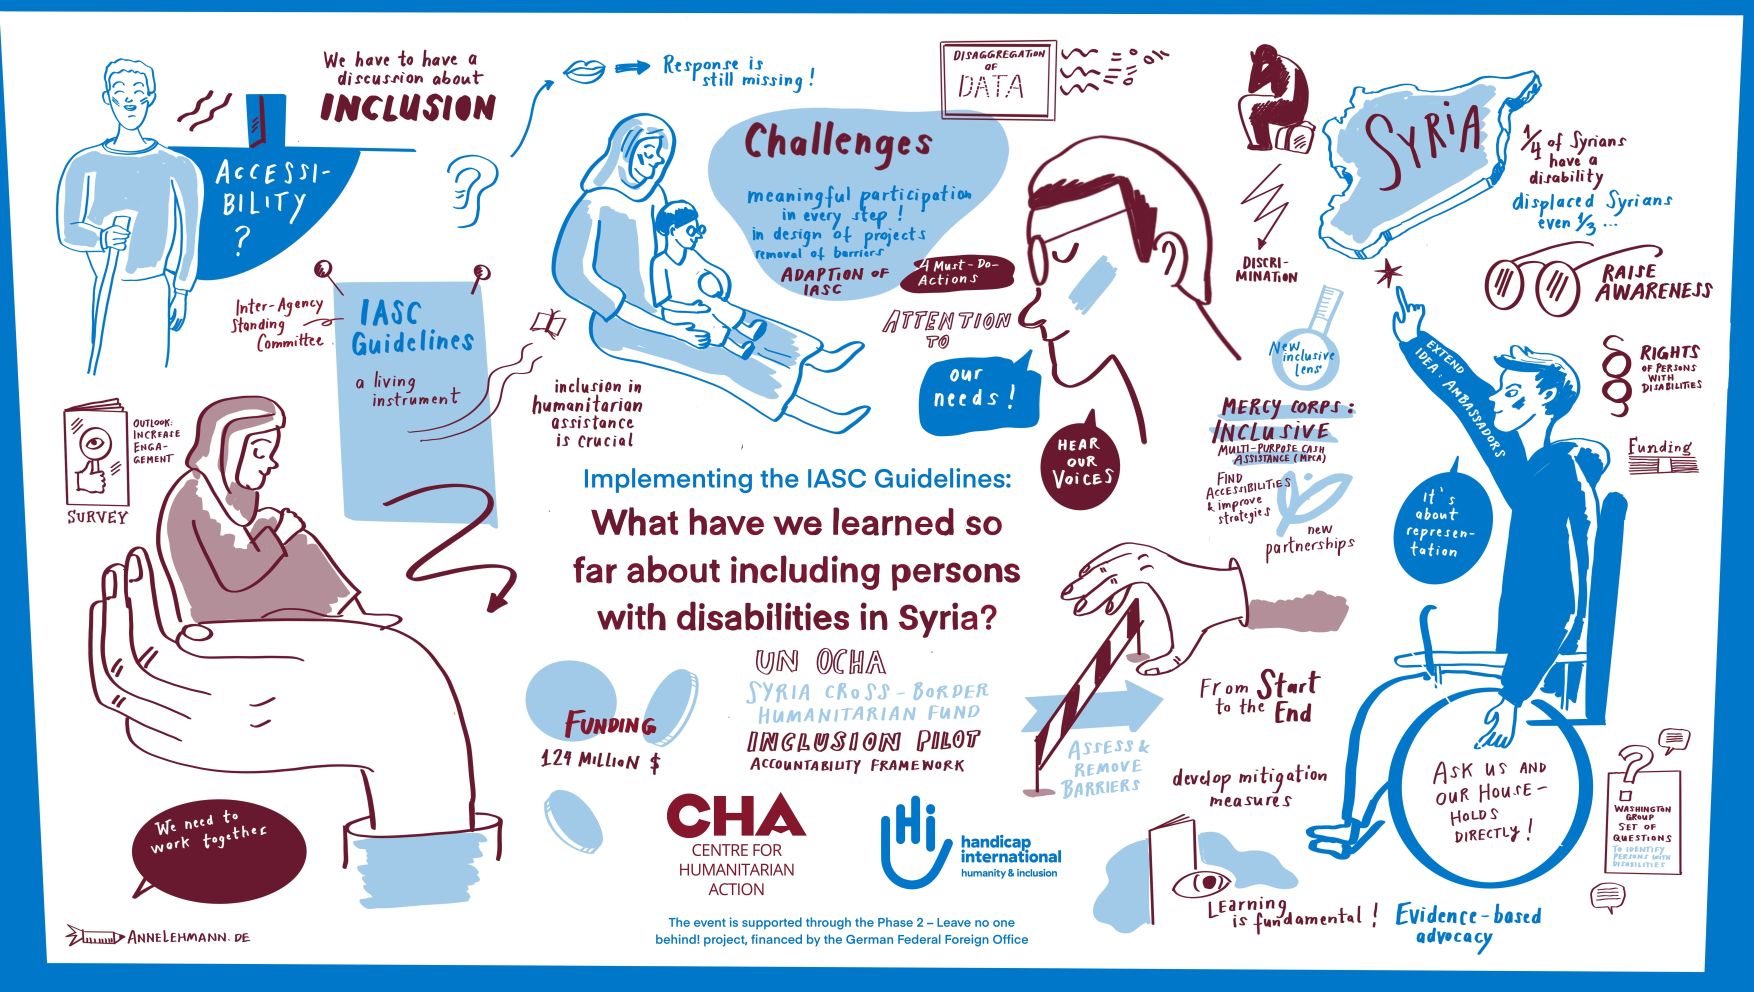 Graphic Recording of the event on the implementation of the Inter-Agency Standing Committee (IASC) Guidelines in Syria